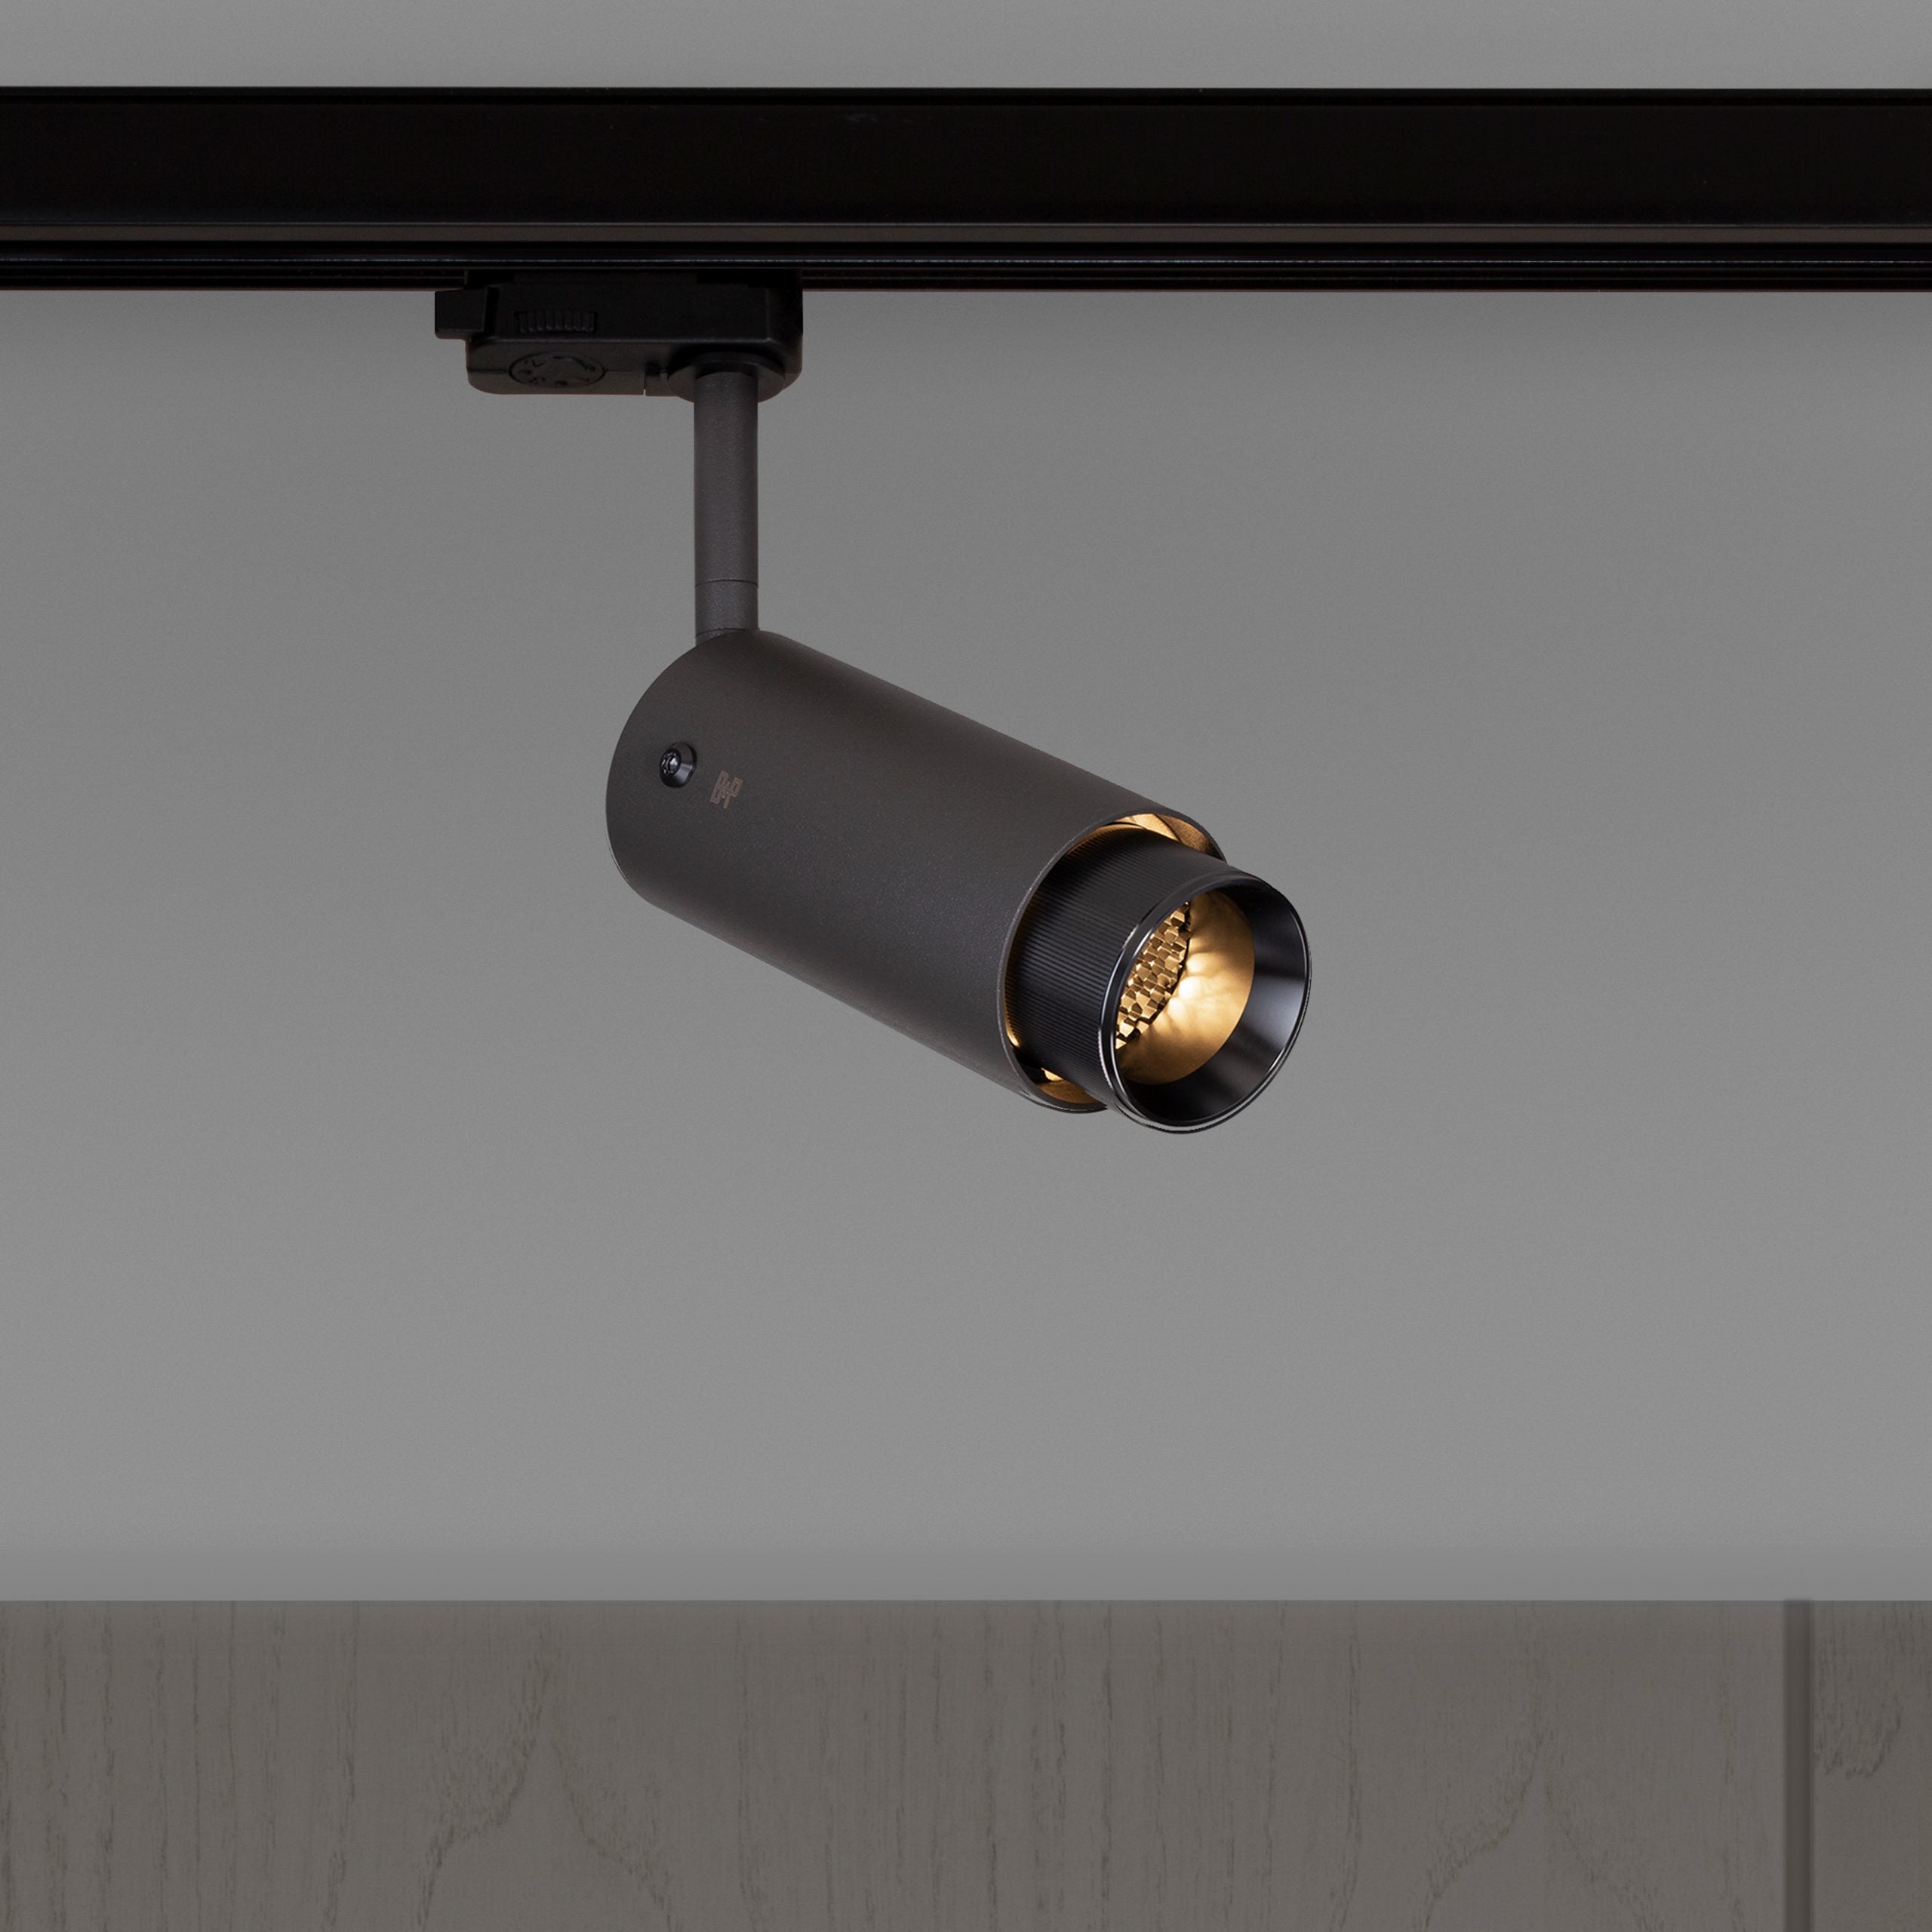 Buster + Punch Exhaust Track Flush Mount Ceiling Light Buster + Punch Graphite & Gun Metal  